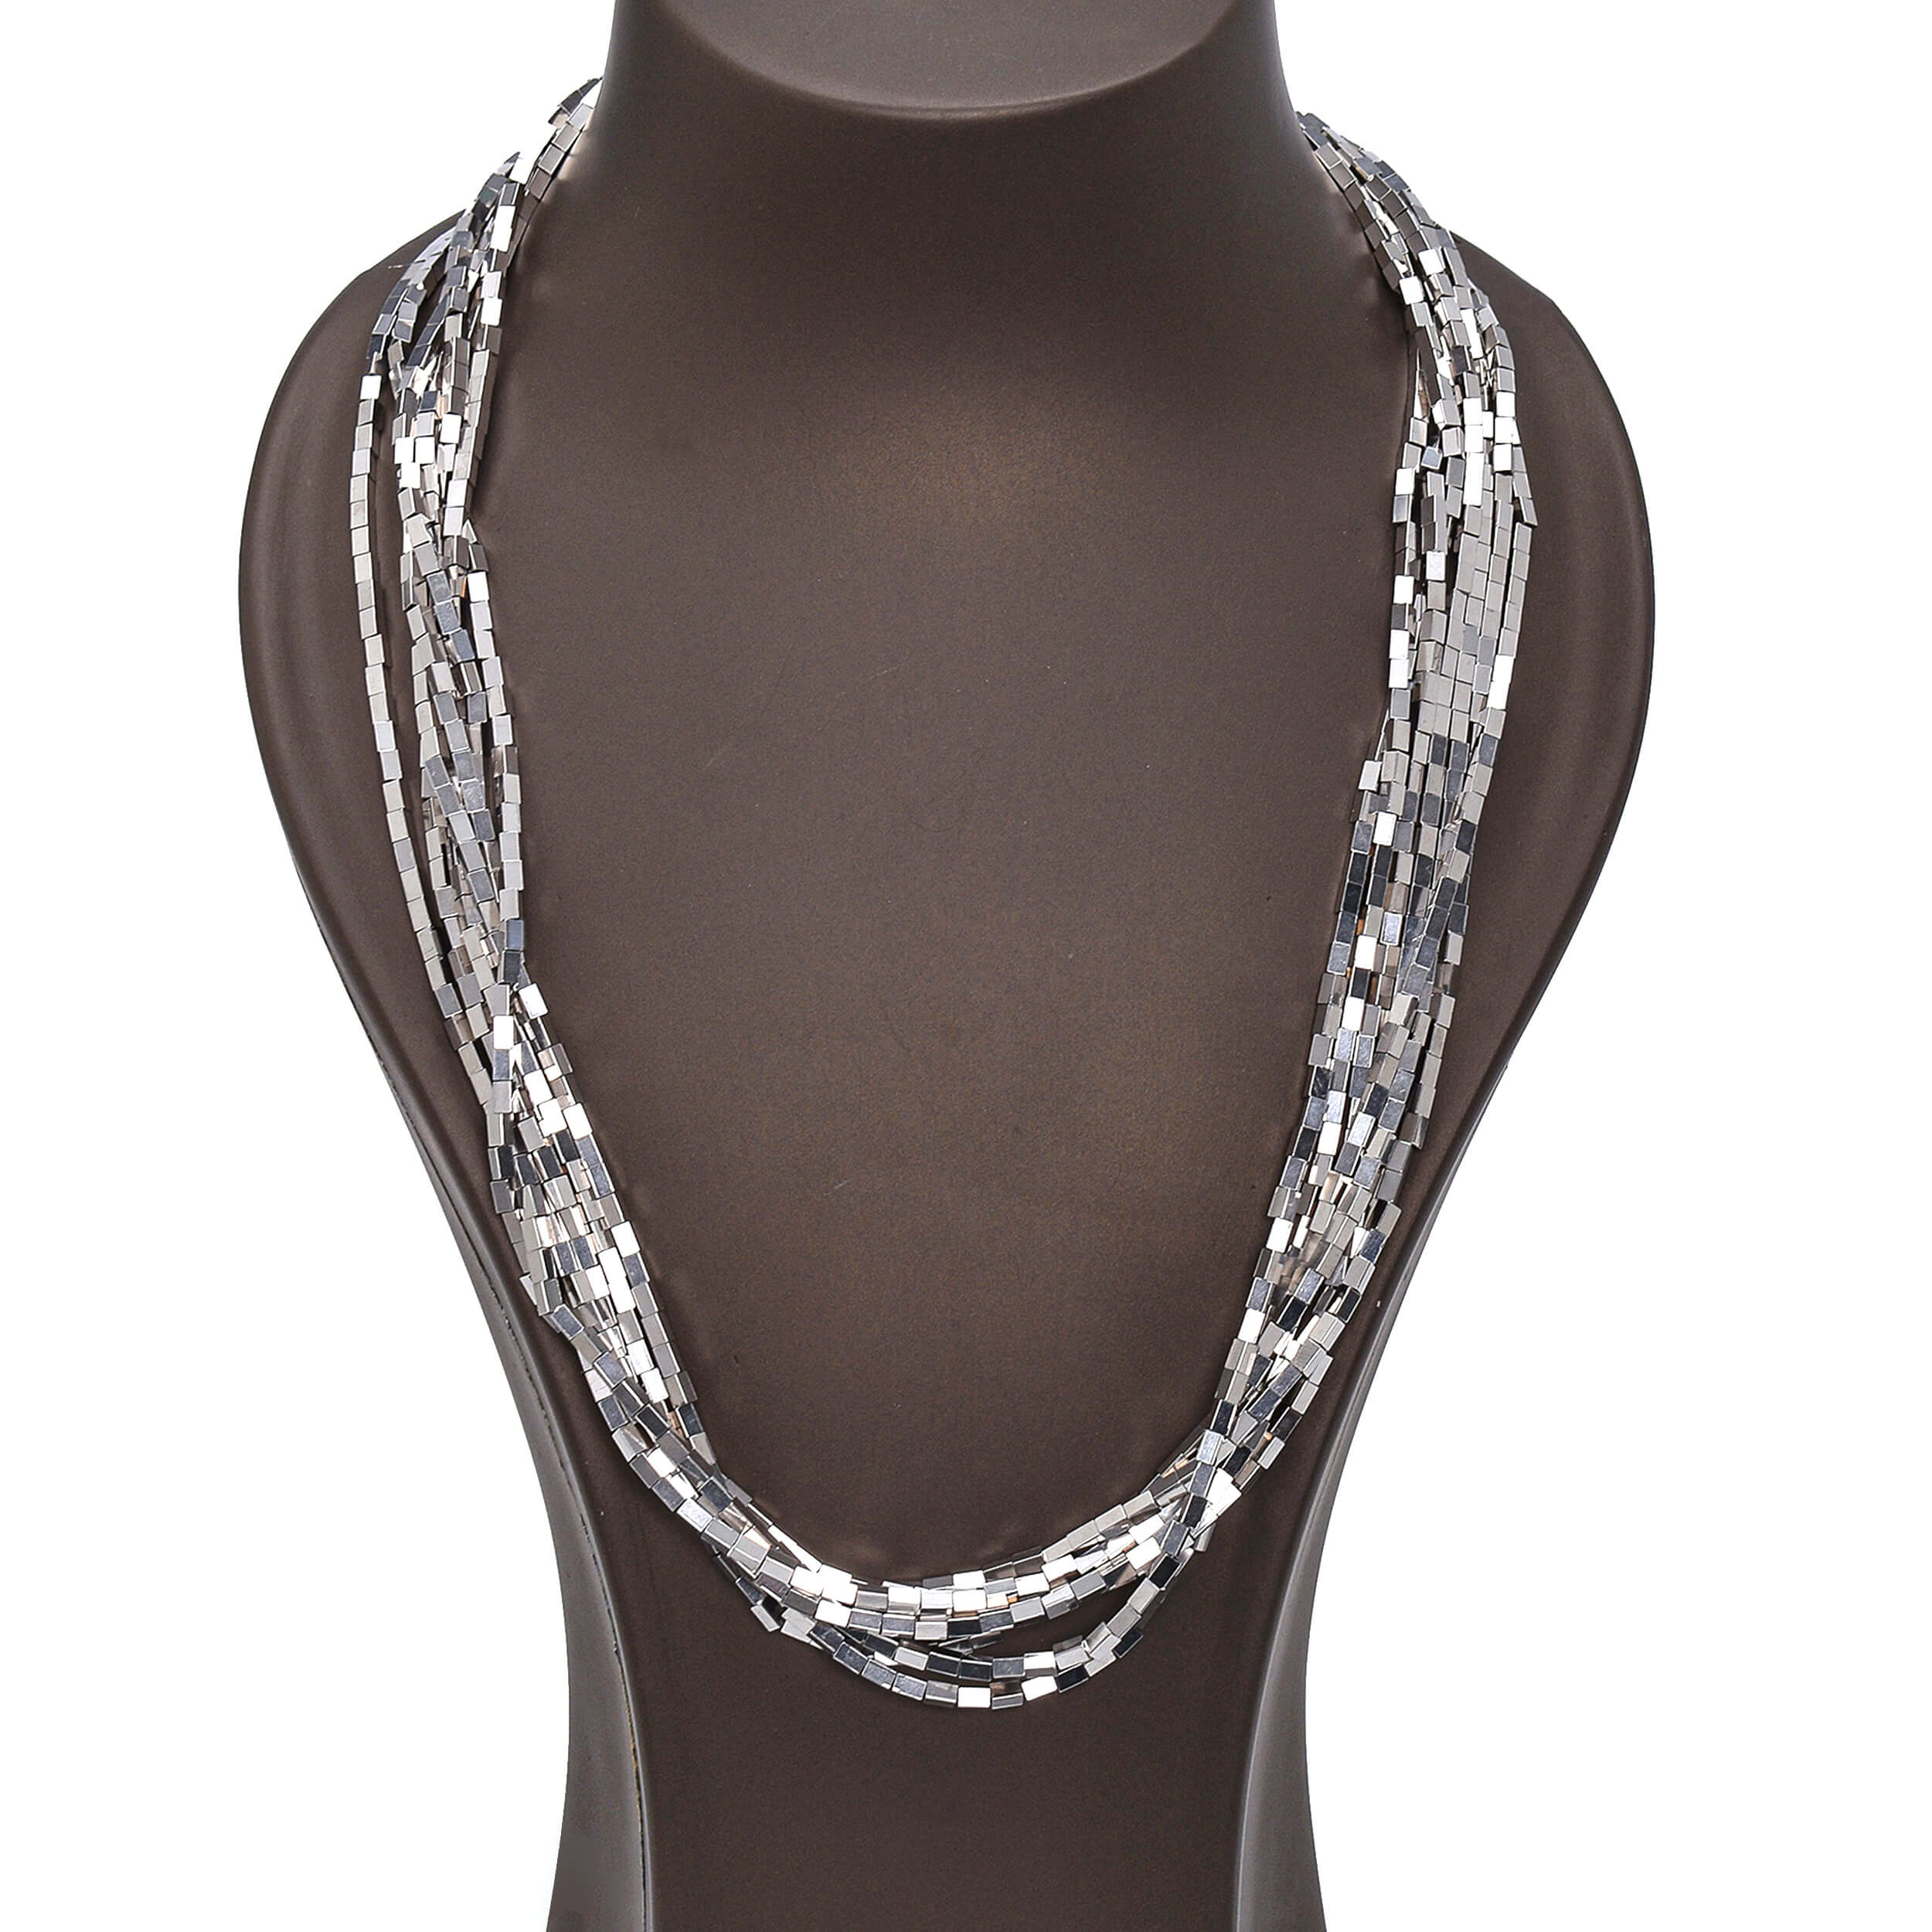 Chanel - Silver Chain 1980's Vintage D'orlan Necklace